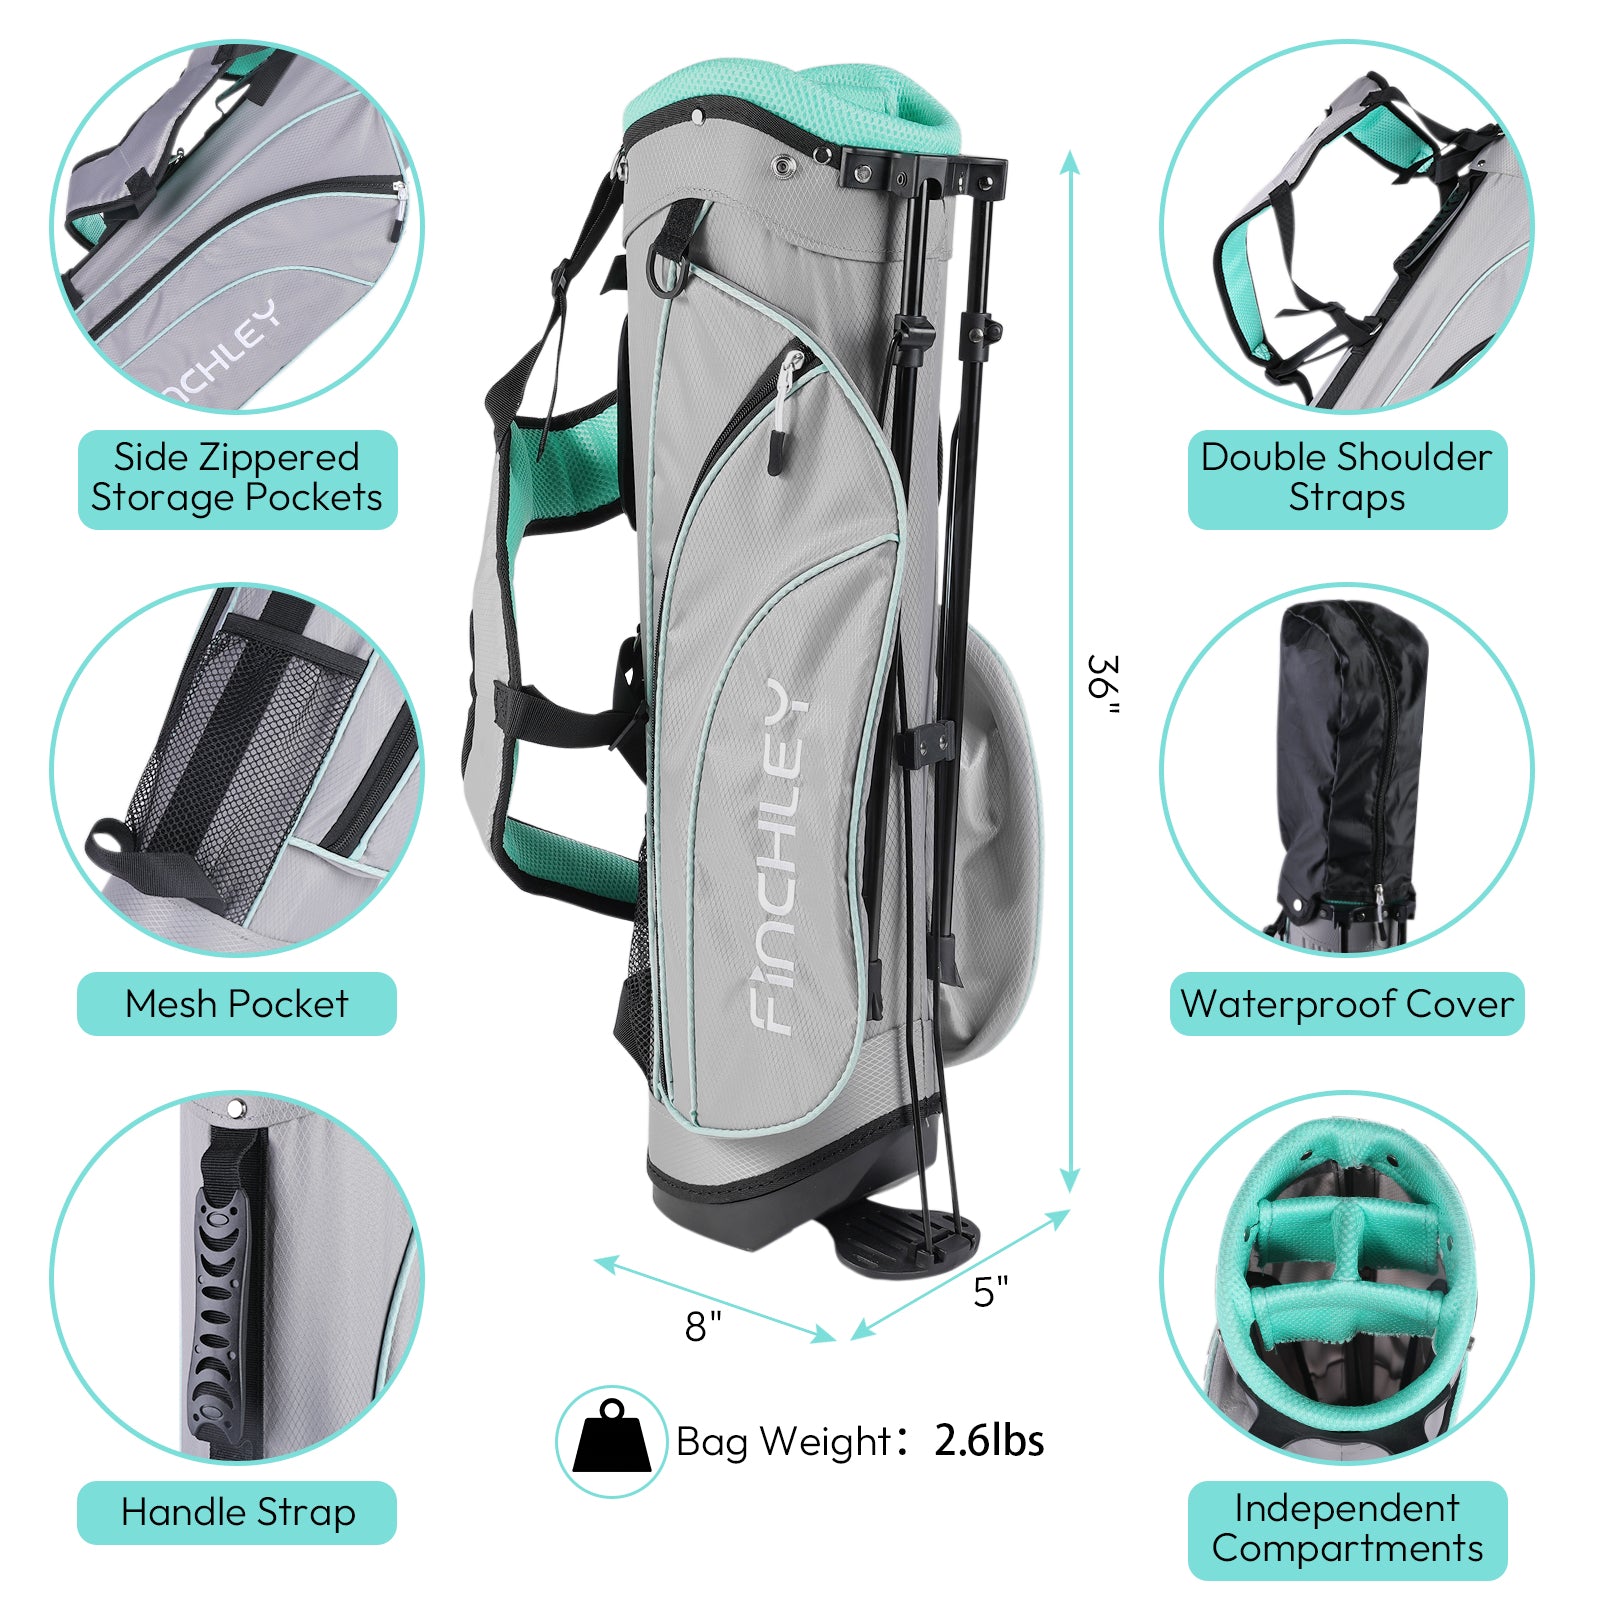 FINCHLEY Right-Handed 4-Piece Kids' Golf Set